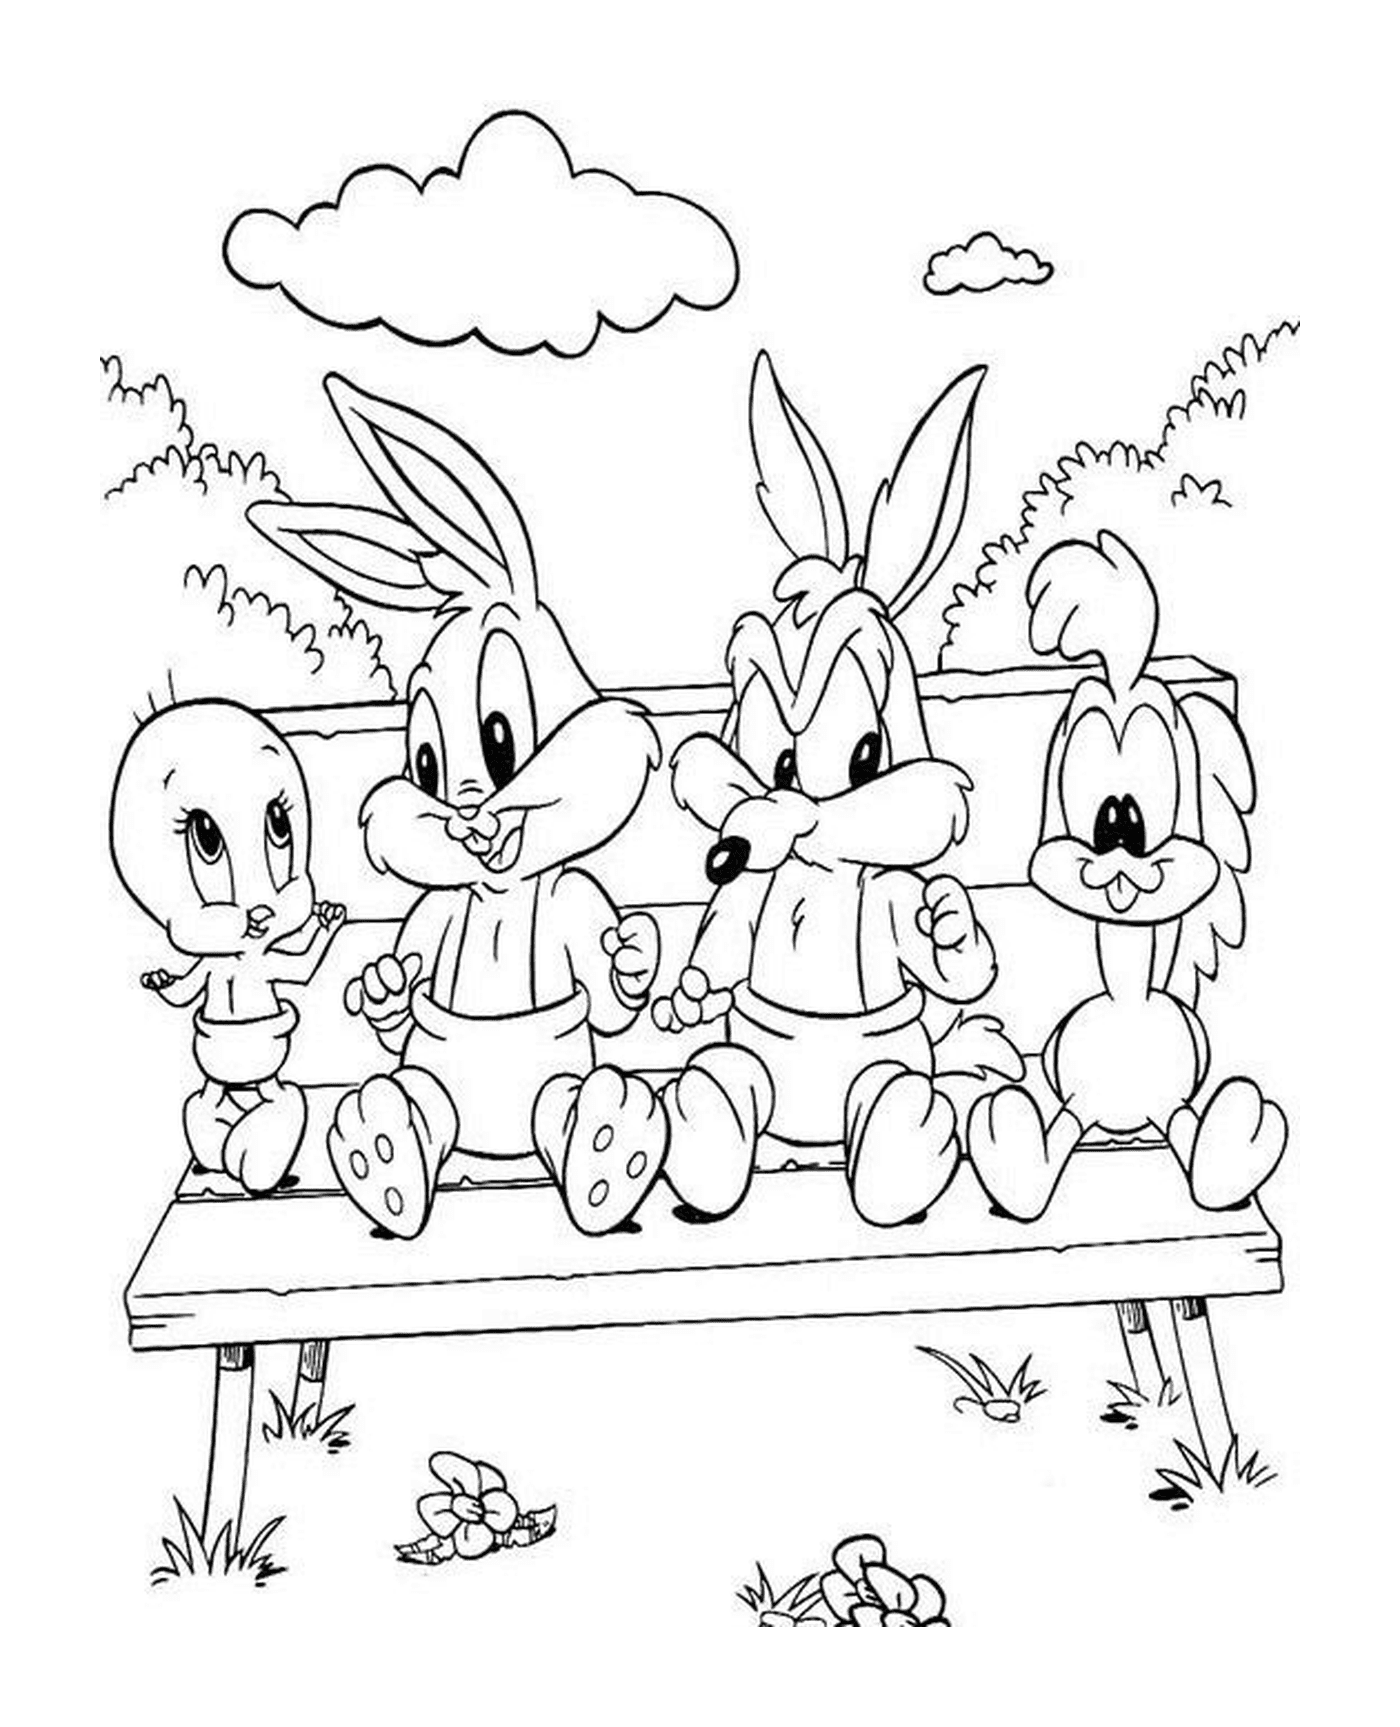  The Looney Tunes sitting on a bench 